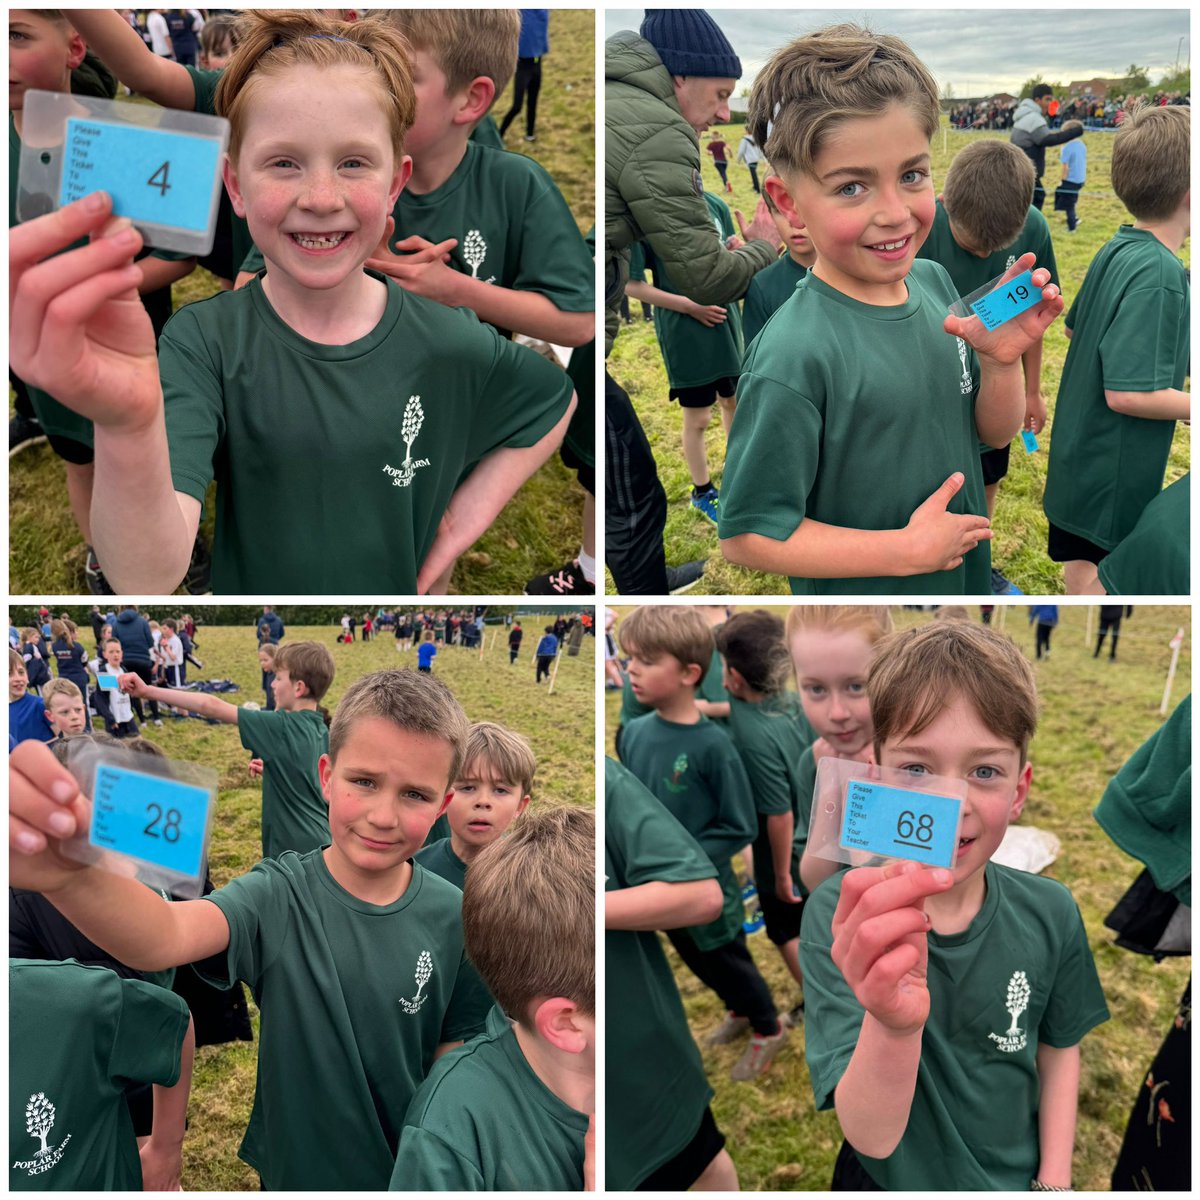 So proud of our children who took part in the cross-country event this evening. They were amazing! #team #crosscountry #schoolsport #TeamSpirit #proud #grantham #school #primary #poplarfarm